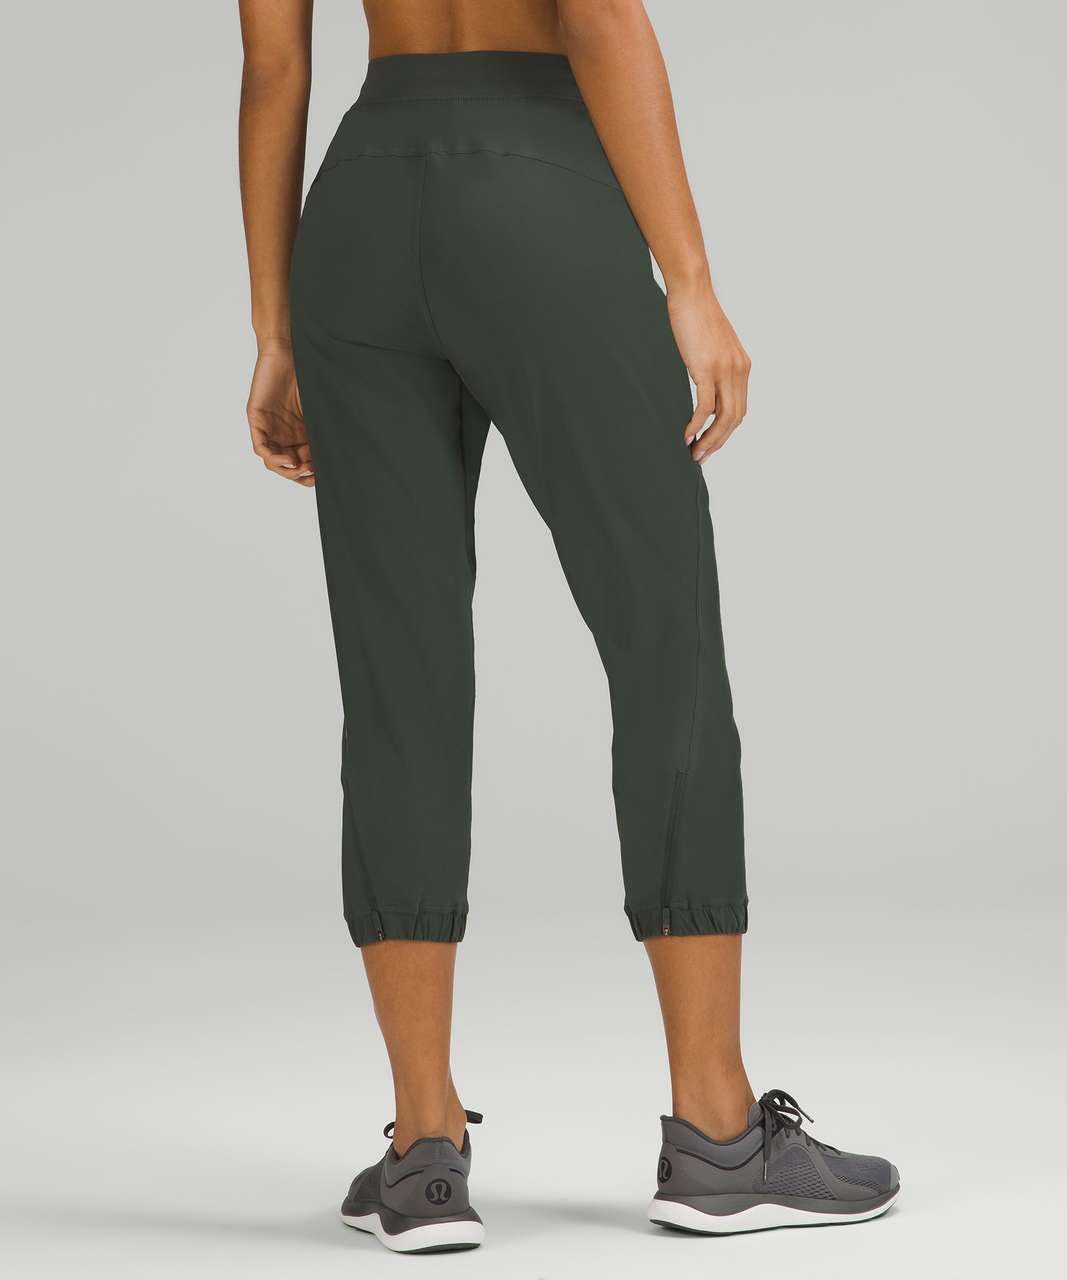 Lululemon Adapted State High-Rise Cropped Jogger 23" - Smoked Spruce